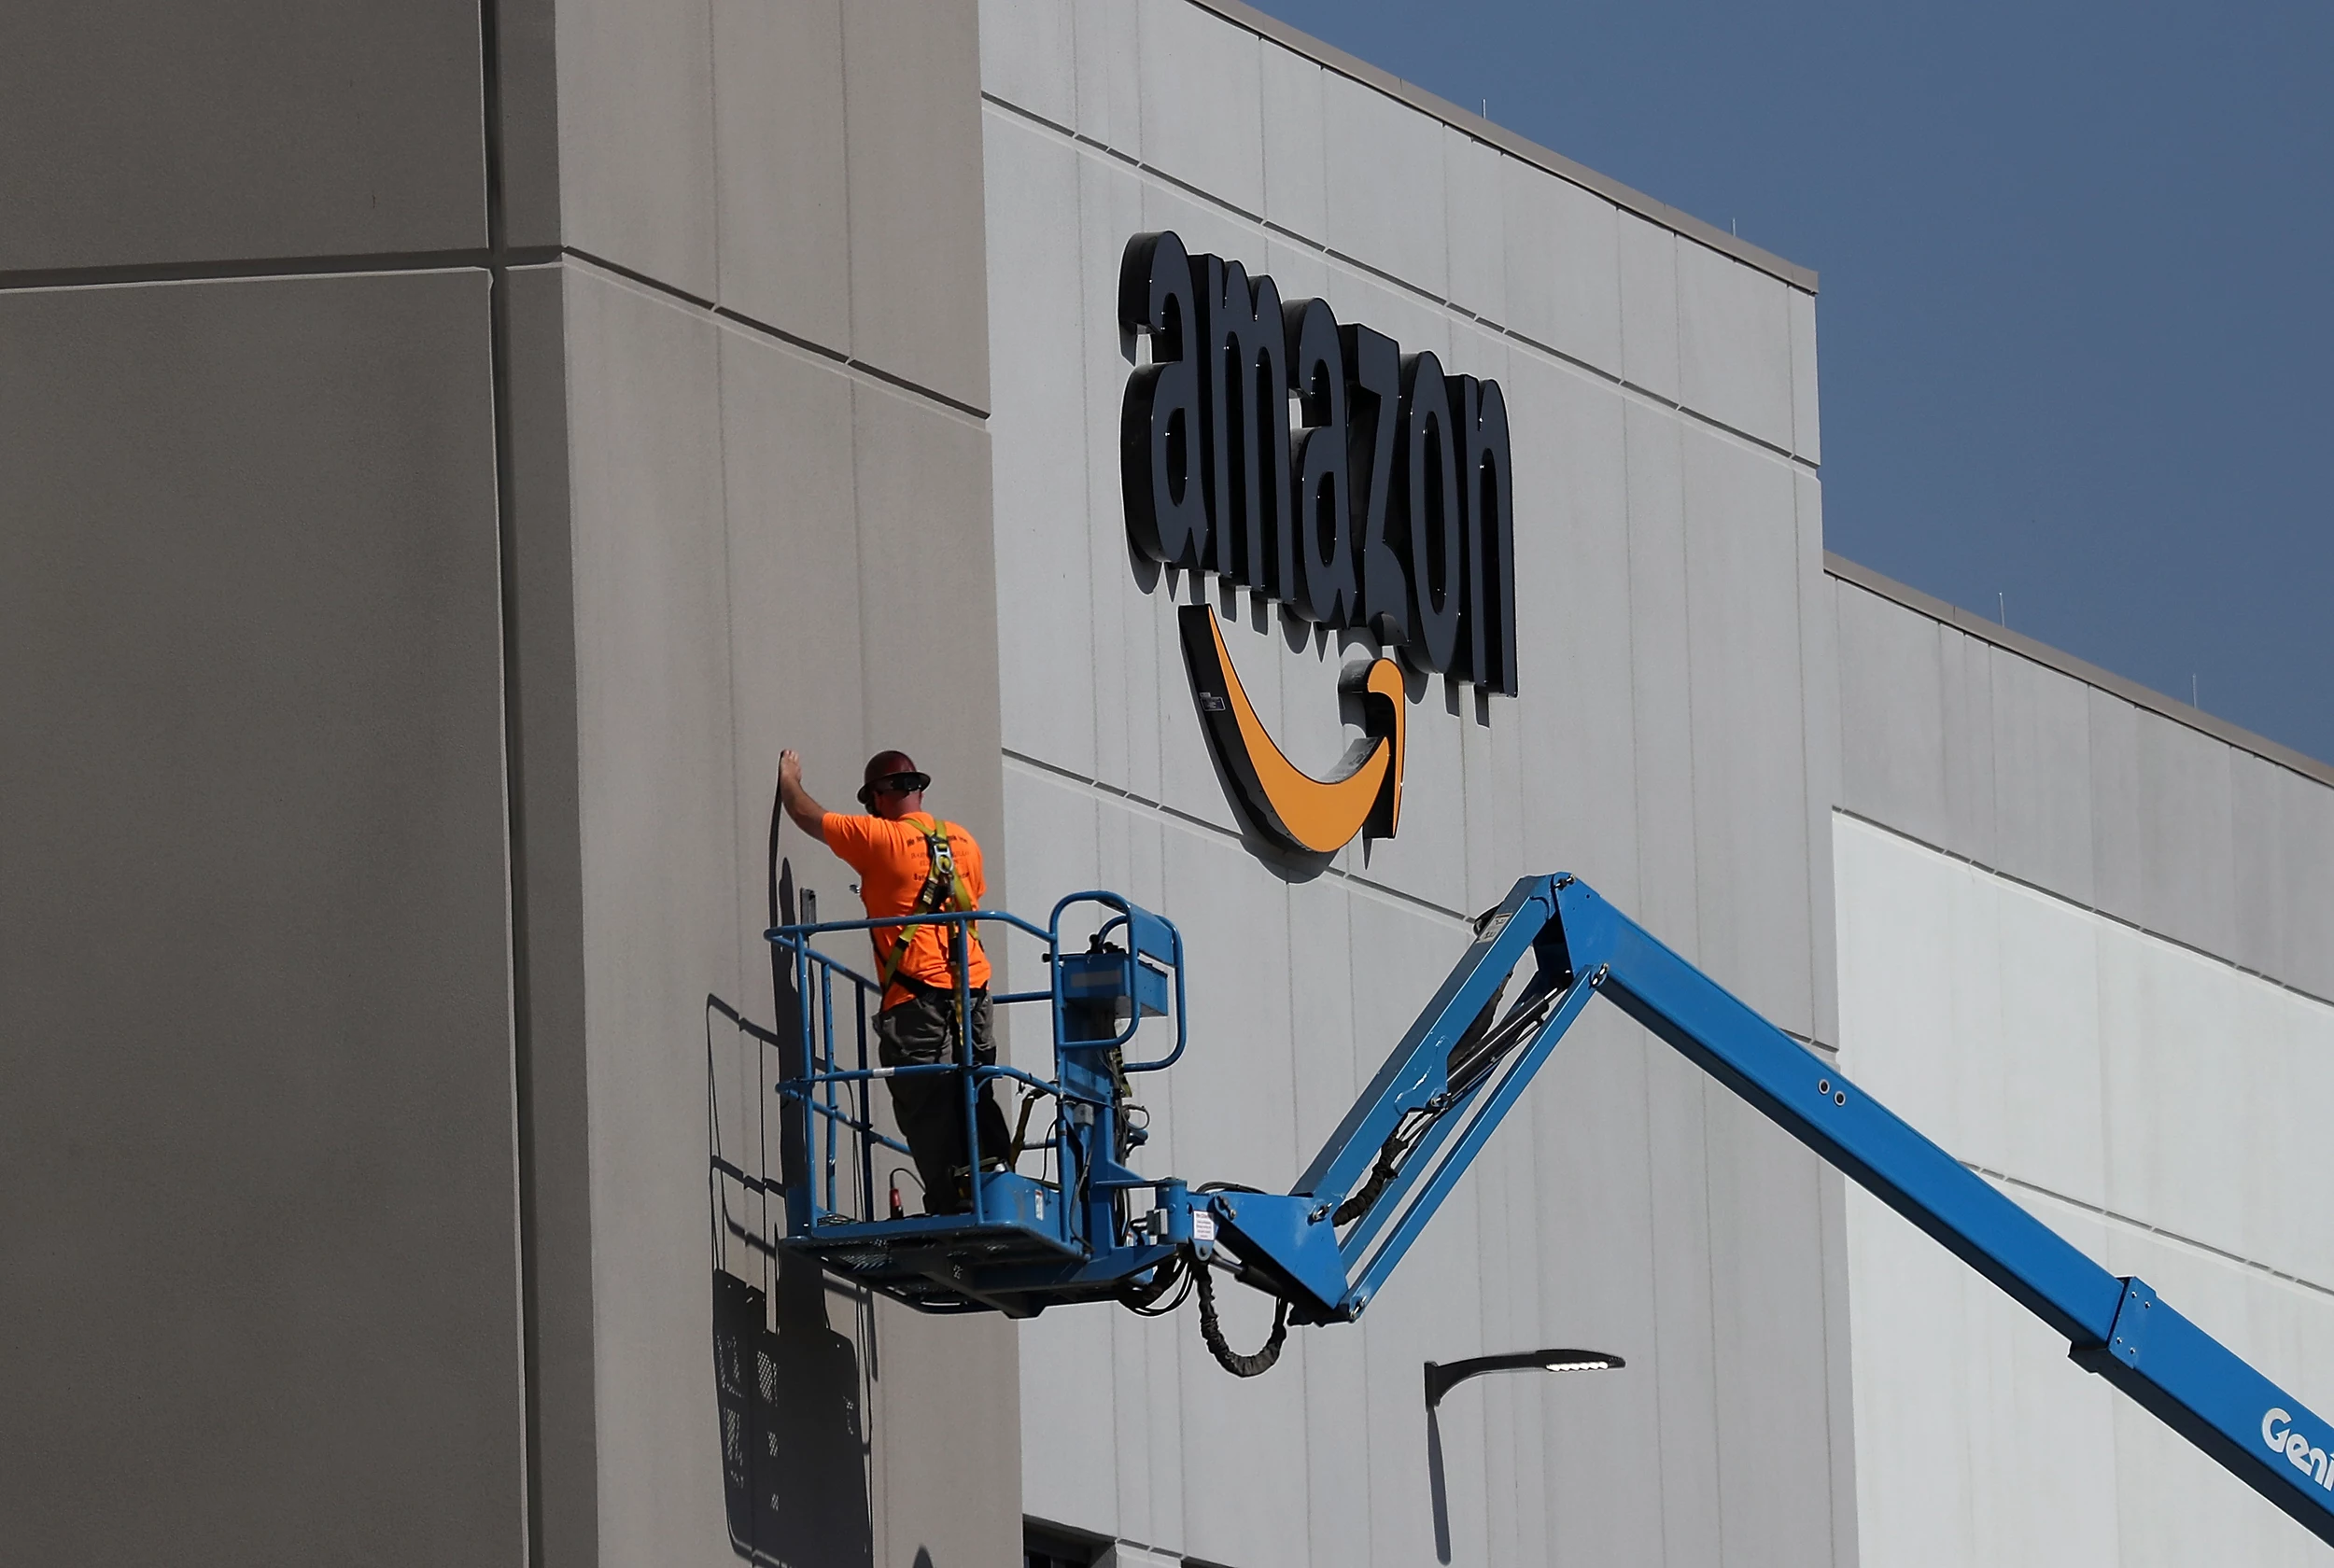 New Jersey, future home of Amazon's second headquarters?